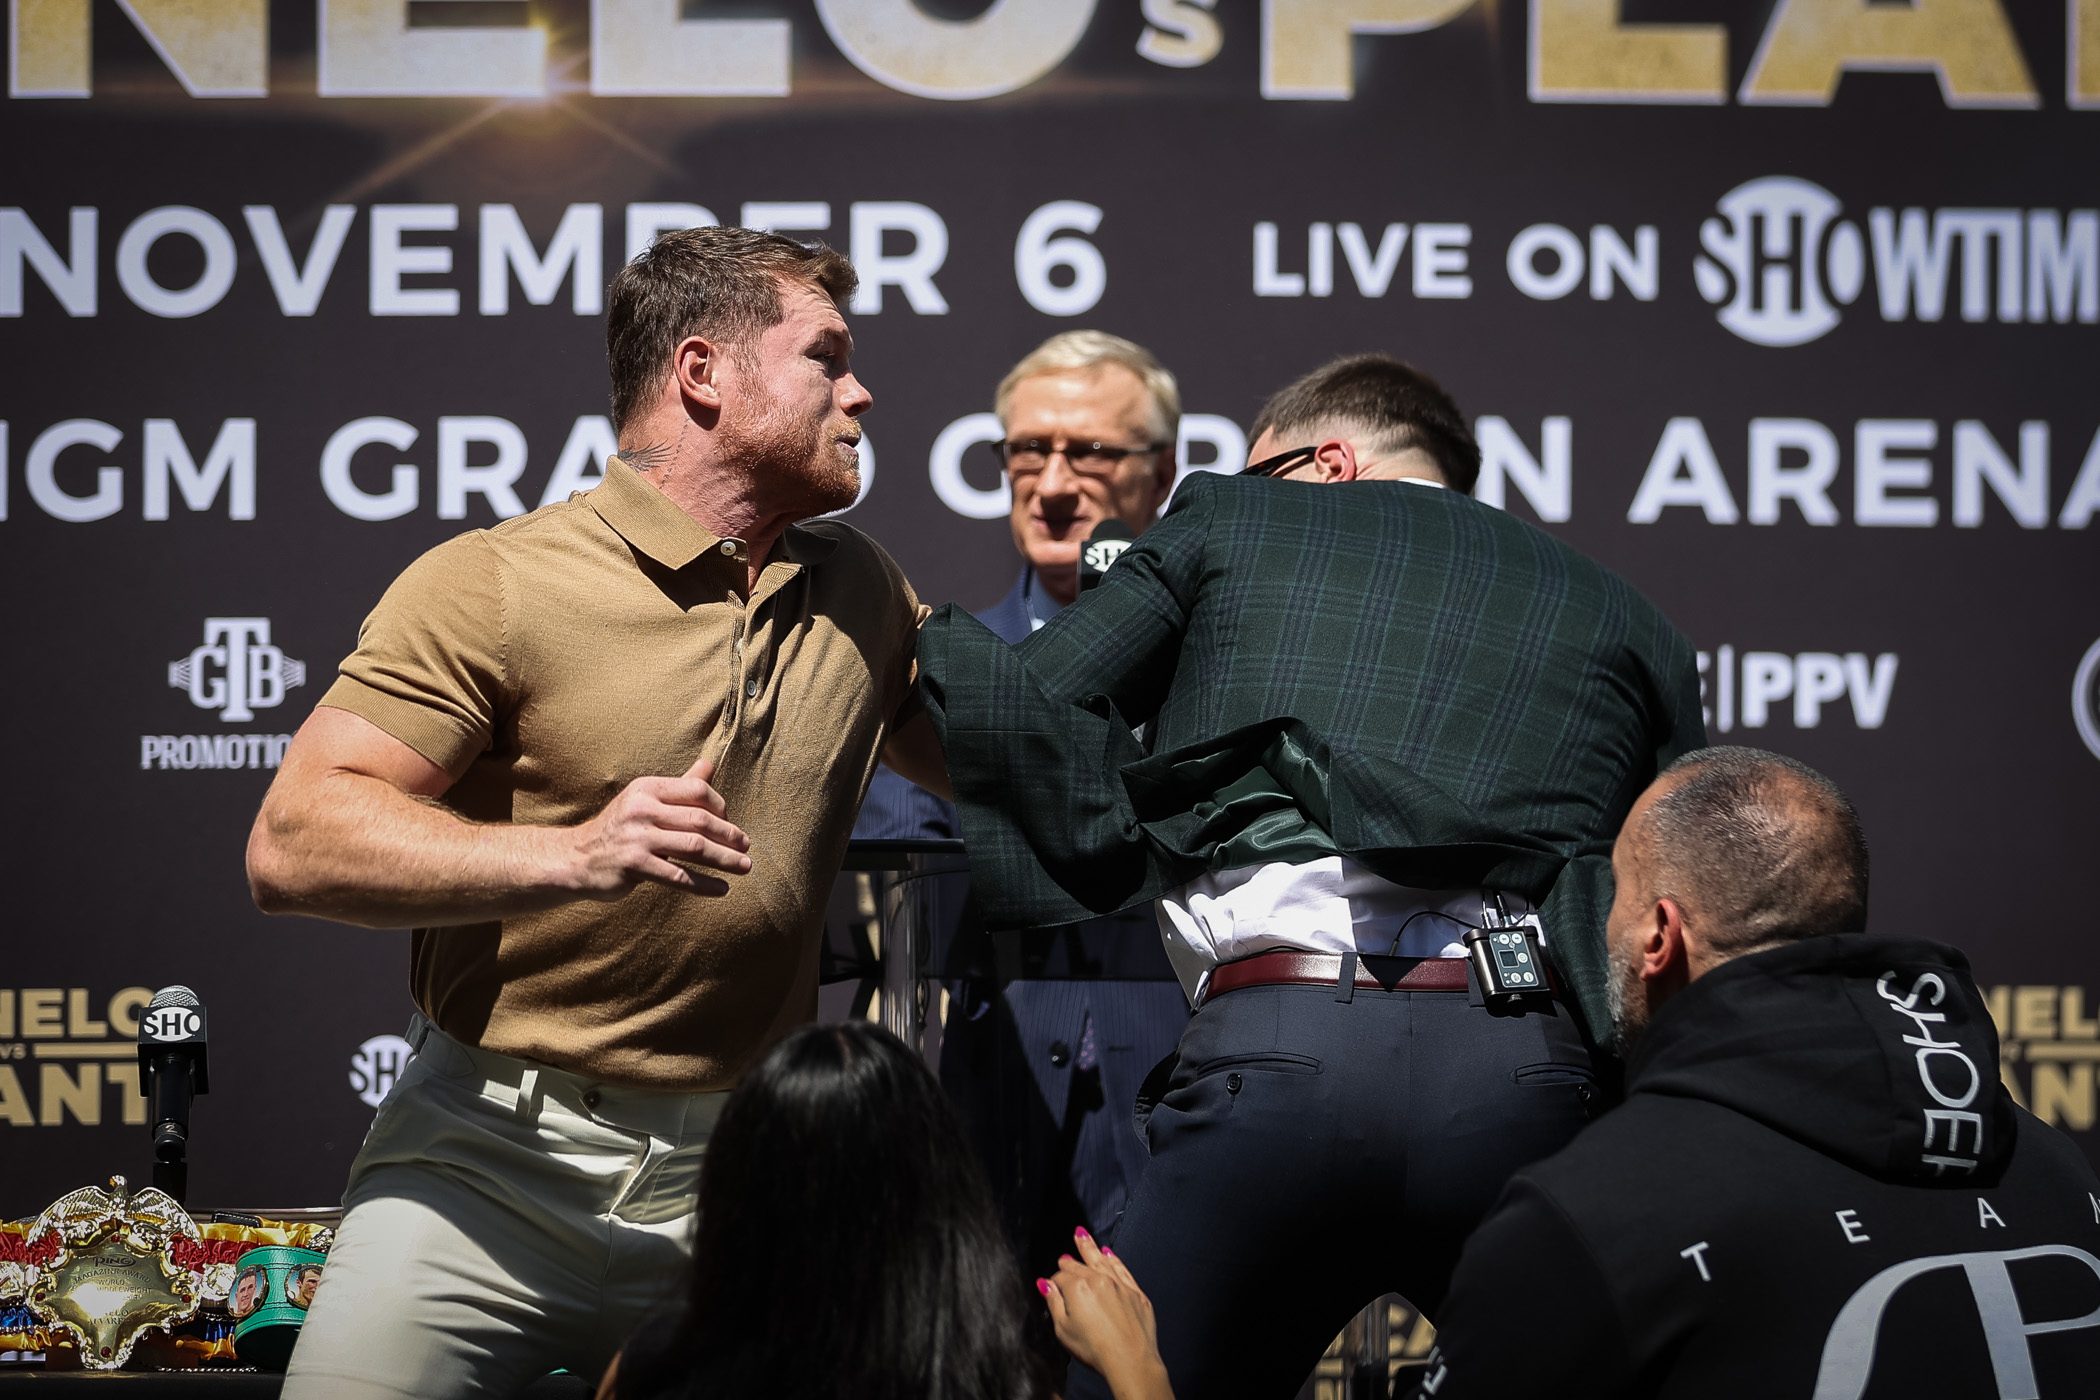 LOOK: Brawl erupts in wild Canelo-Plant media face-off